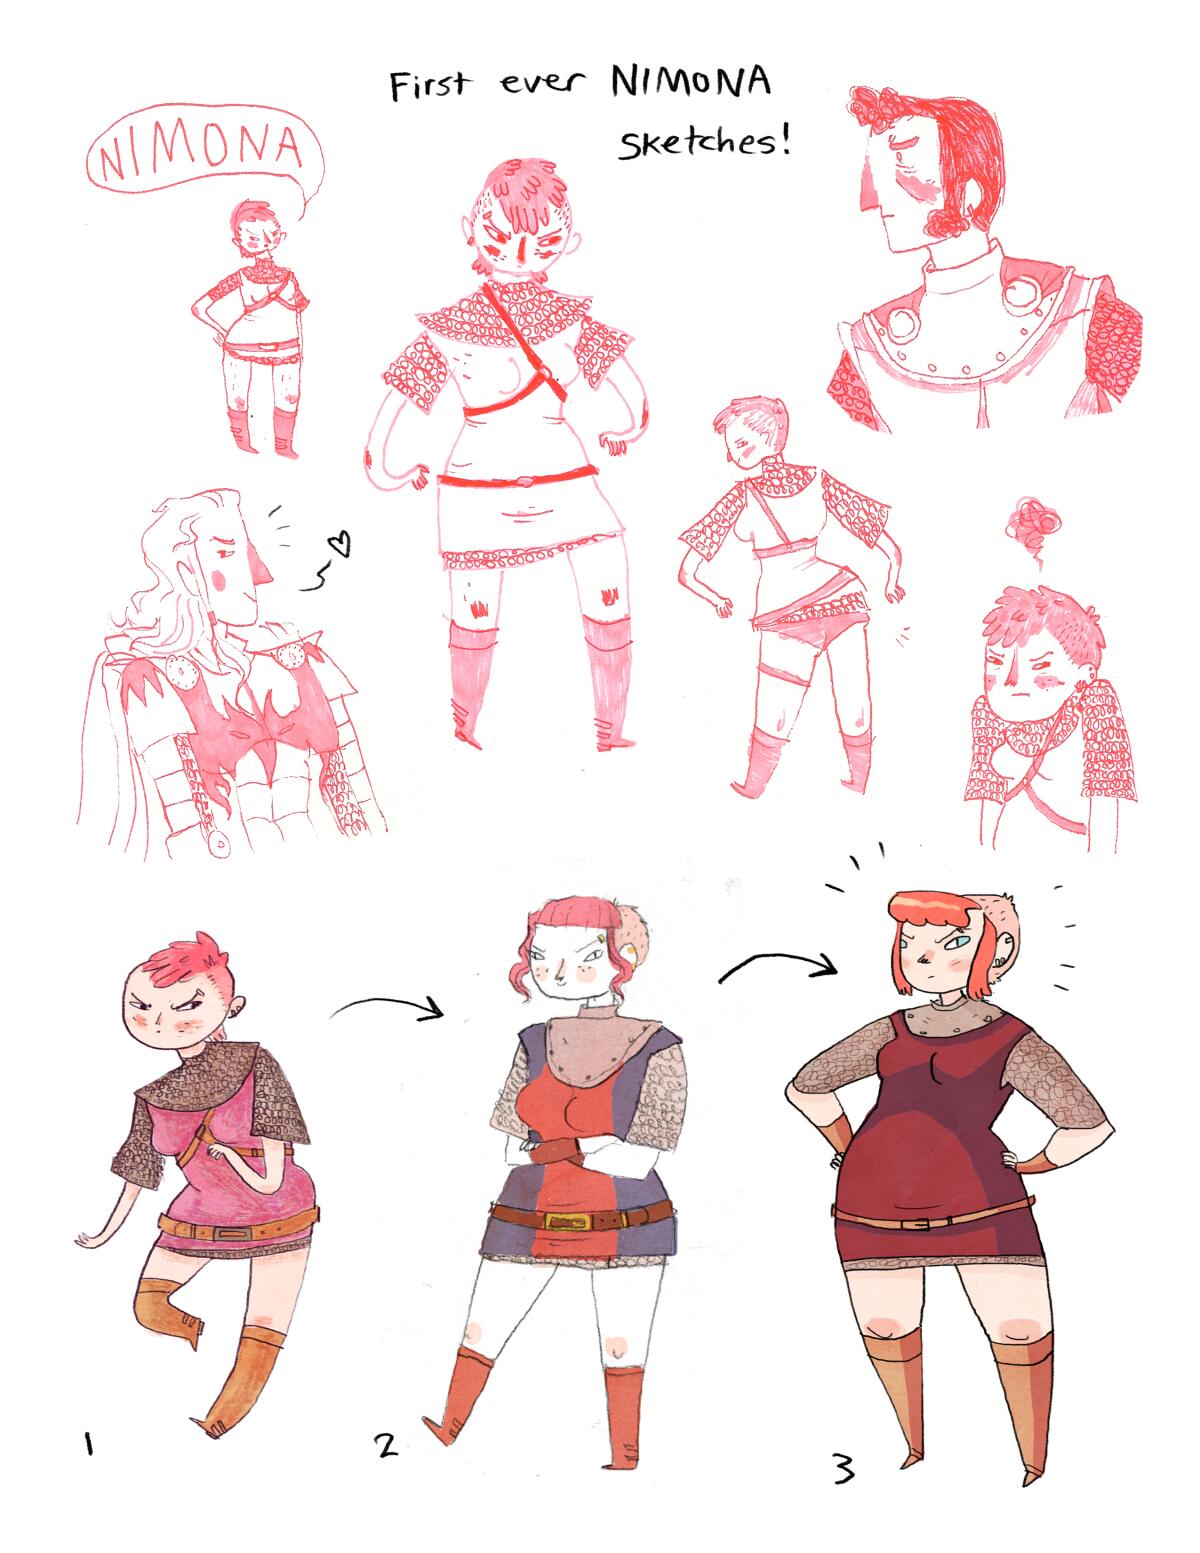 Character sketches of different women